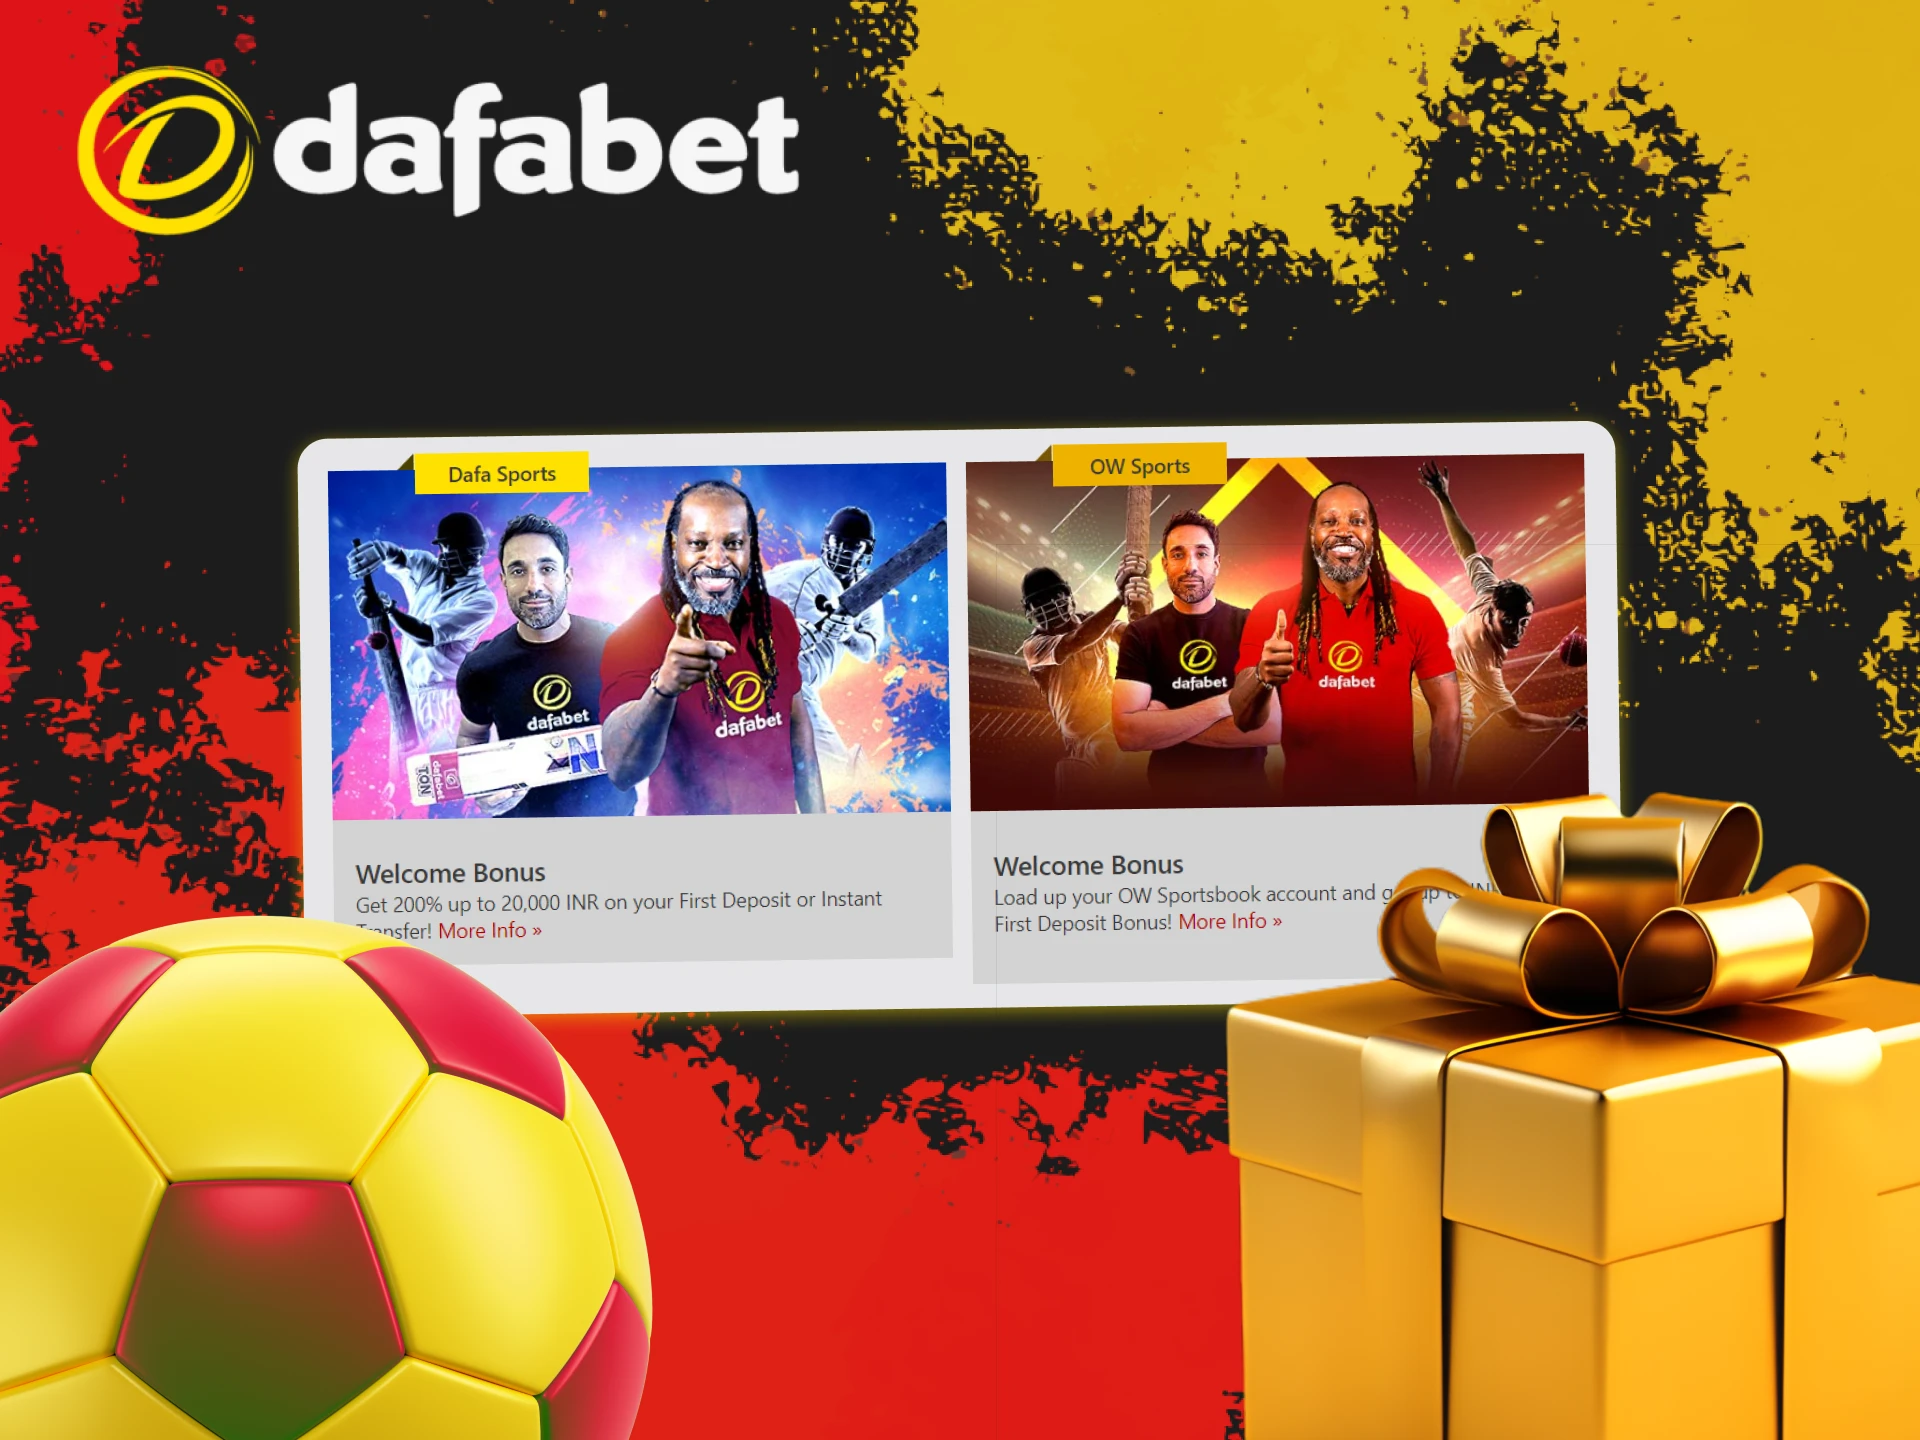 At Dafabet you can get a nice welcome bonus and use it for betting on football.